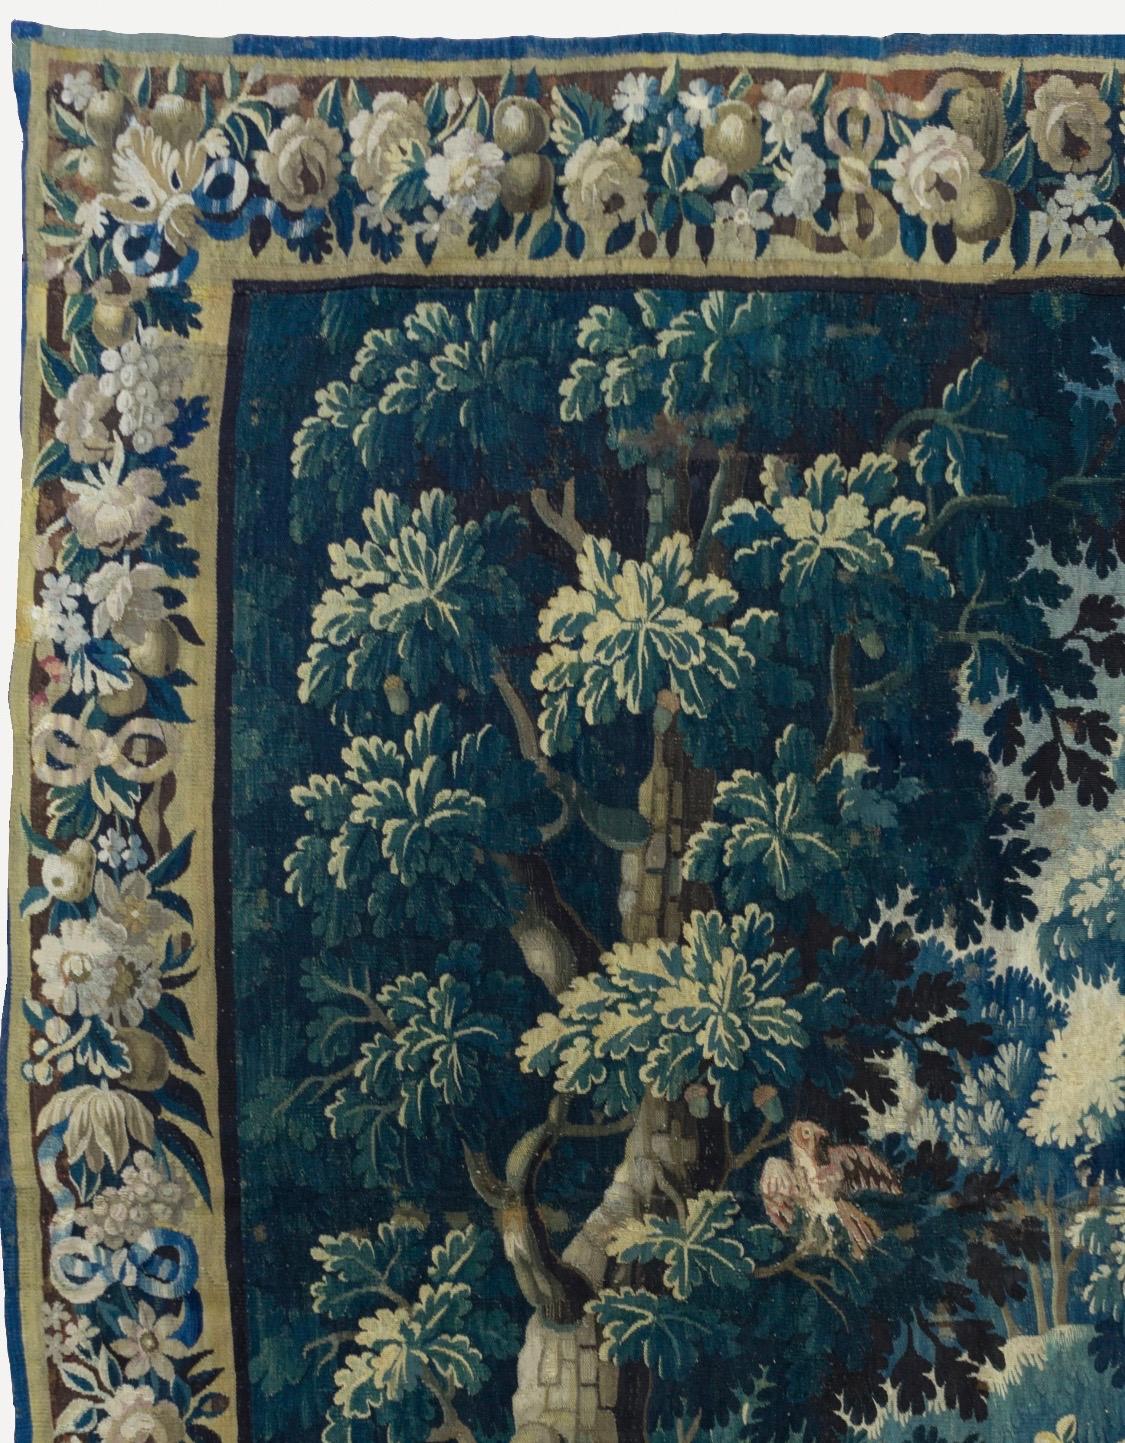 This is a gorgeous antique square 17th century flemish Verdure landscape tapestry with birds depicting a beautiful and rich summer scene of a countryside with lush trees and vegetation, birds and ducks and homes in the distance. The border features